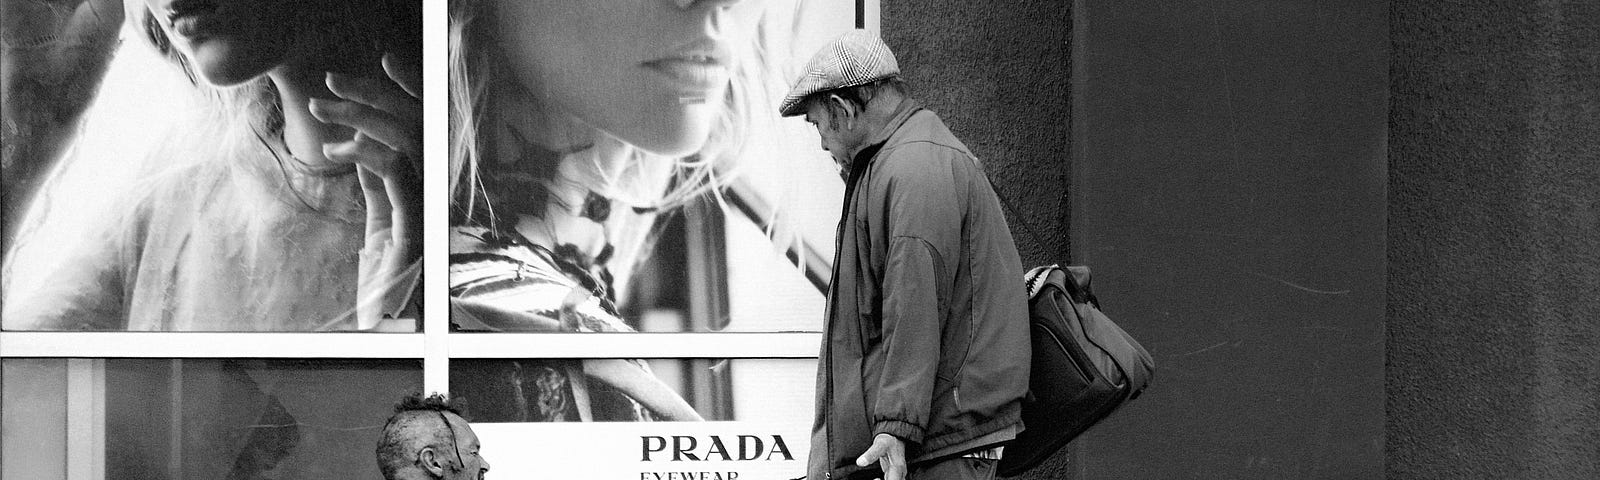 Man with grocery bags approaches a homeless man, both in front of a Prada store display